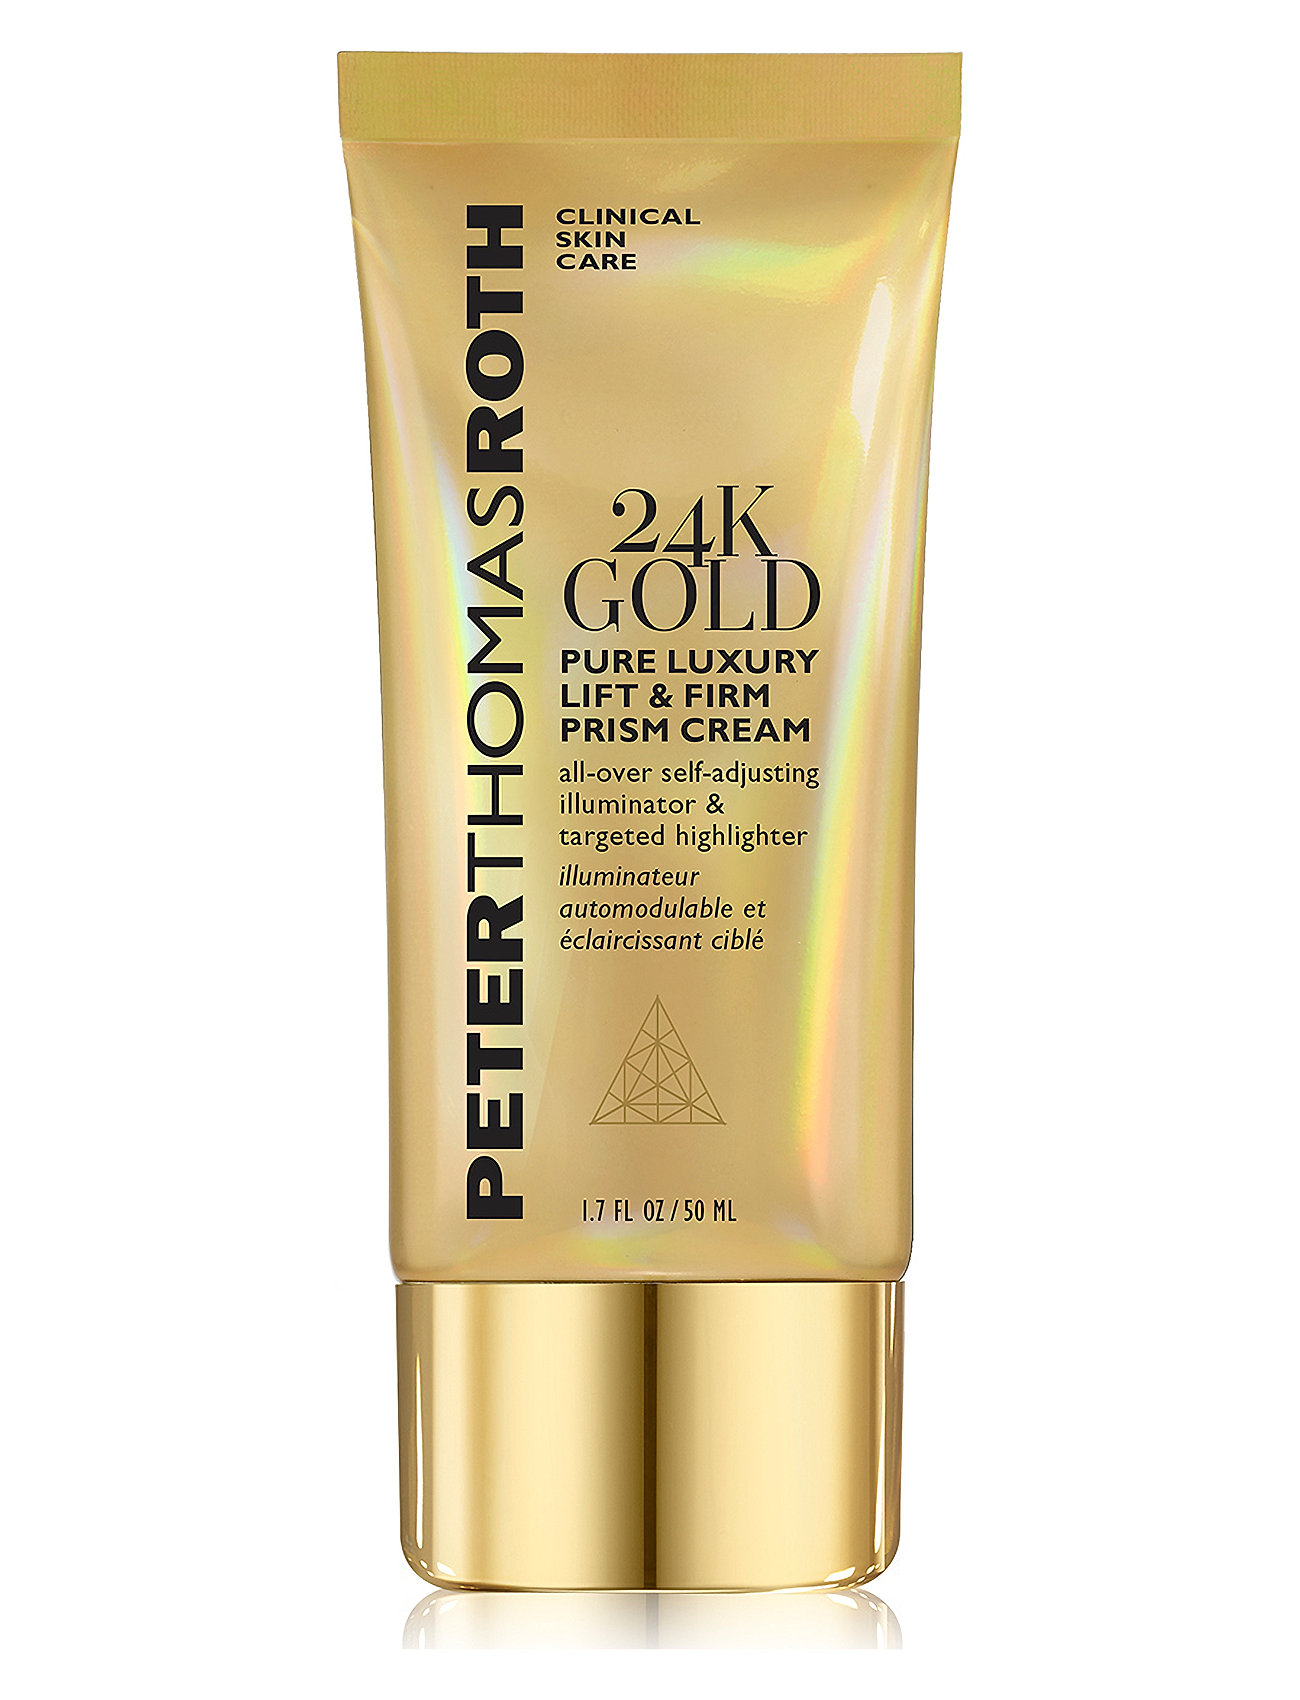 24K Gold Pure Luxury Lift & Firm Prism Cream Makeupprimer Makeup Nude Peter Thomas Roth